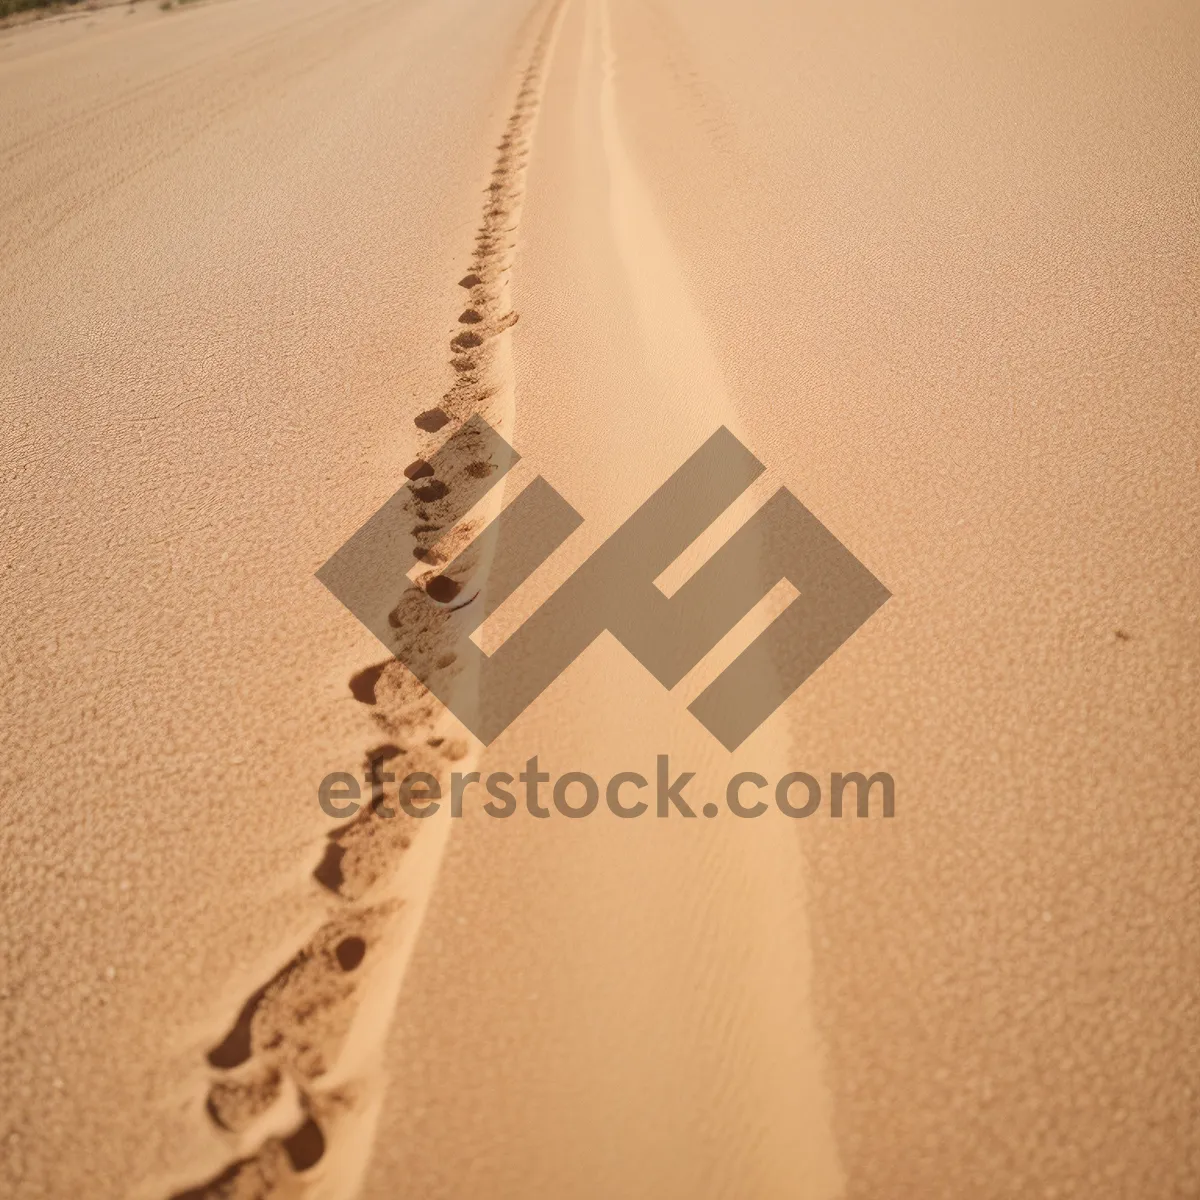 Picture of Sandy Desert Dunes: Tranquil Yellow Landscape